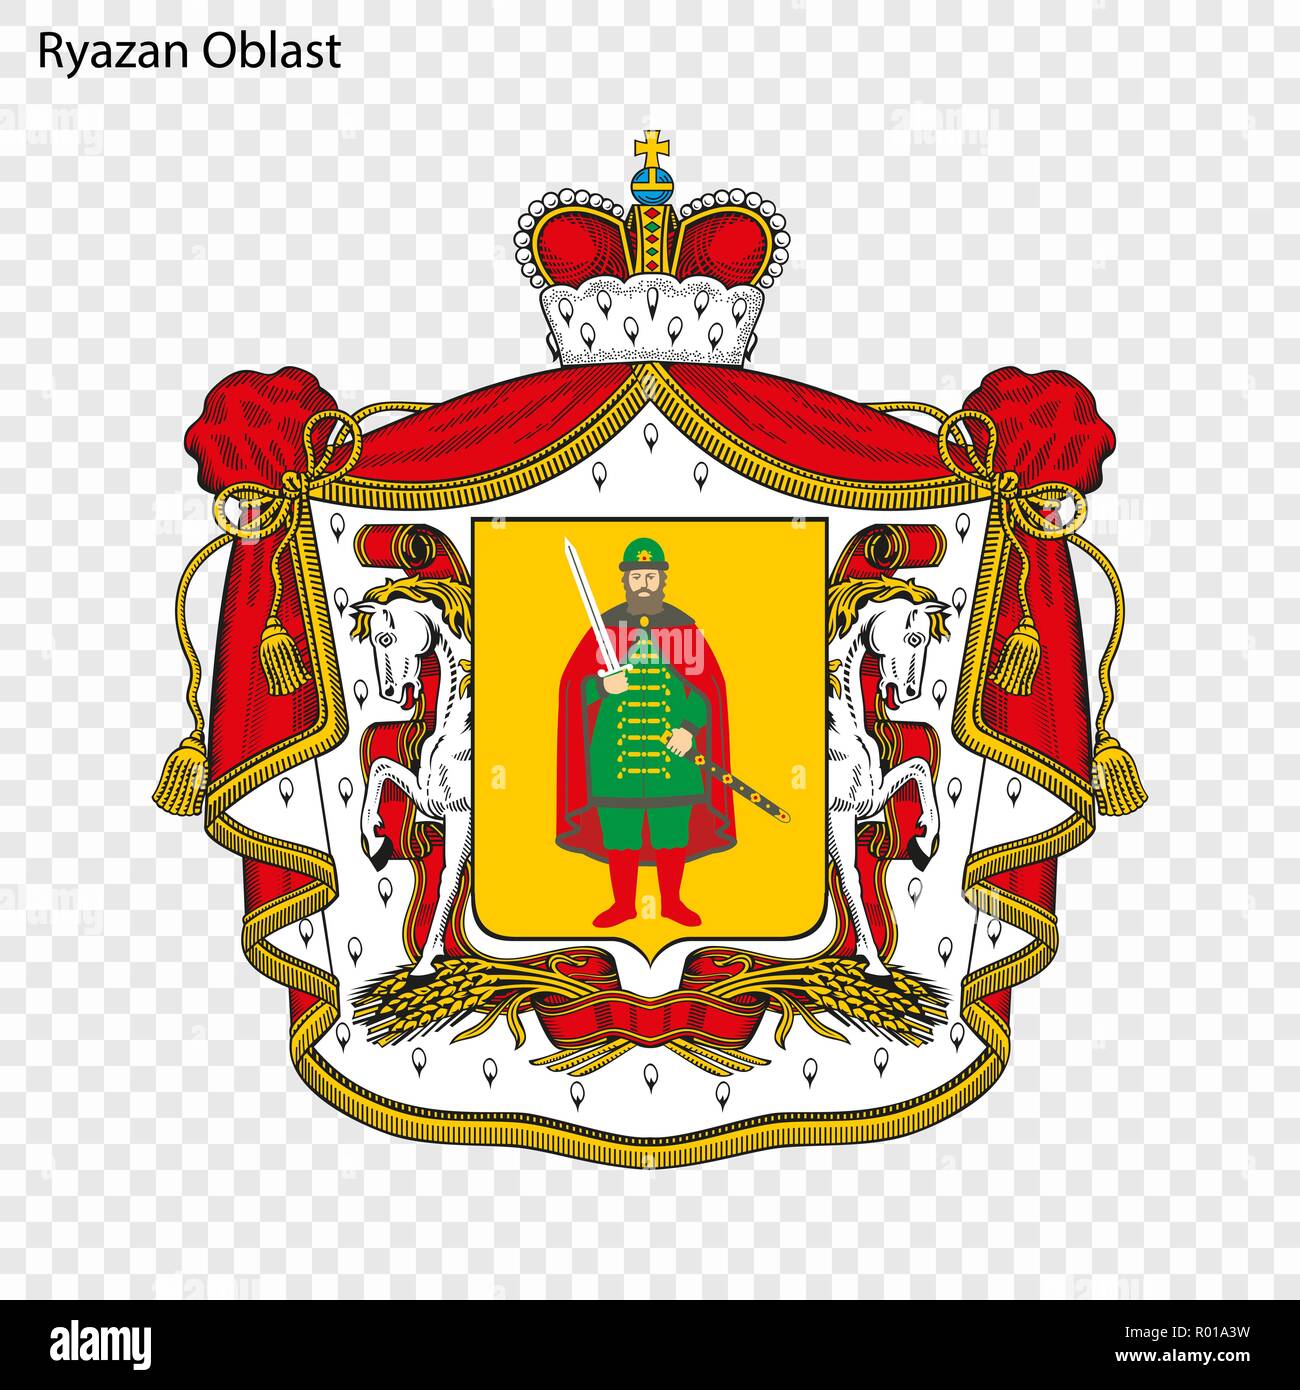 Emblem of Ryazan Oblast, province of Russia Stock Vector